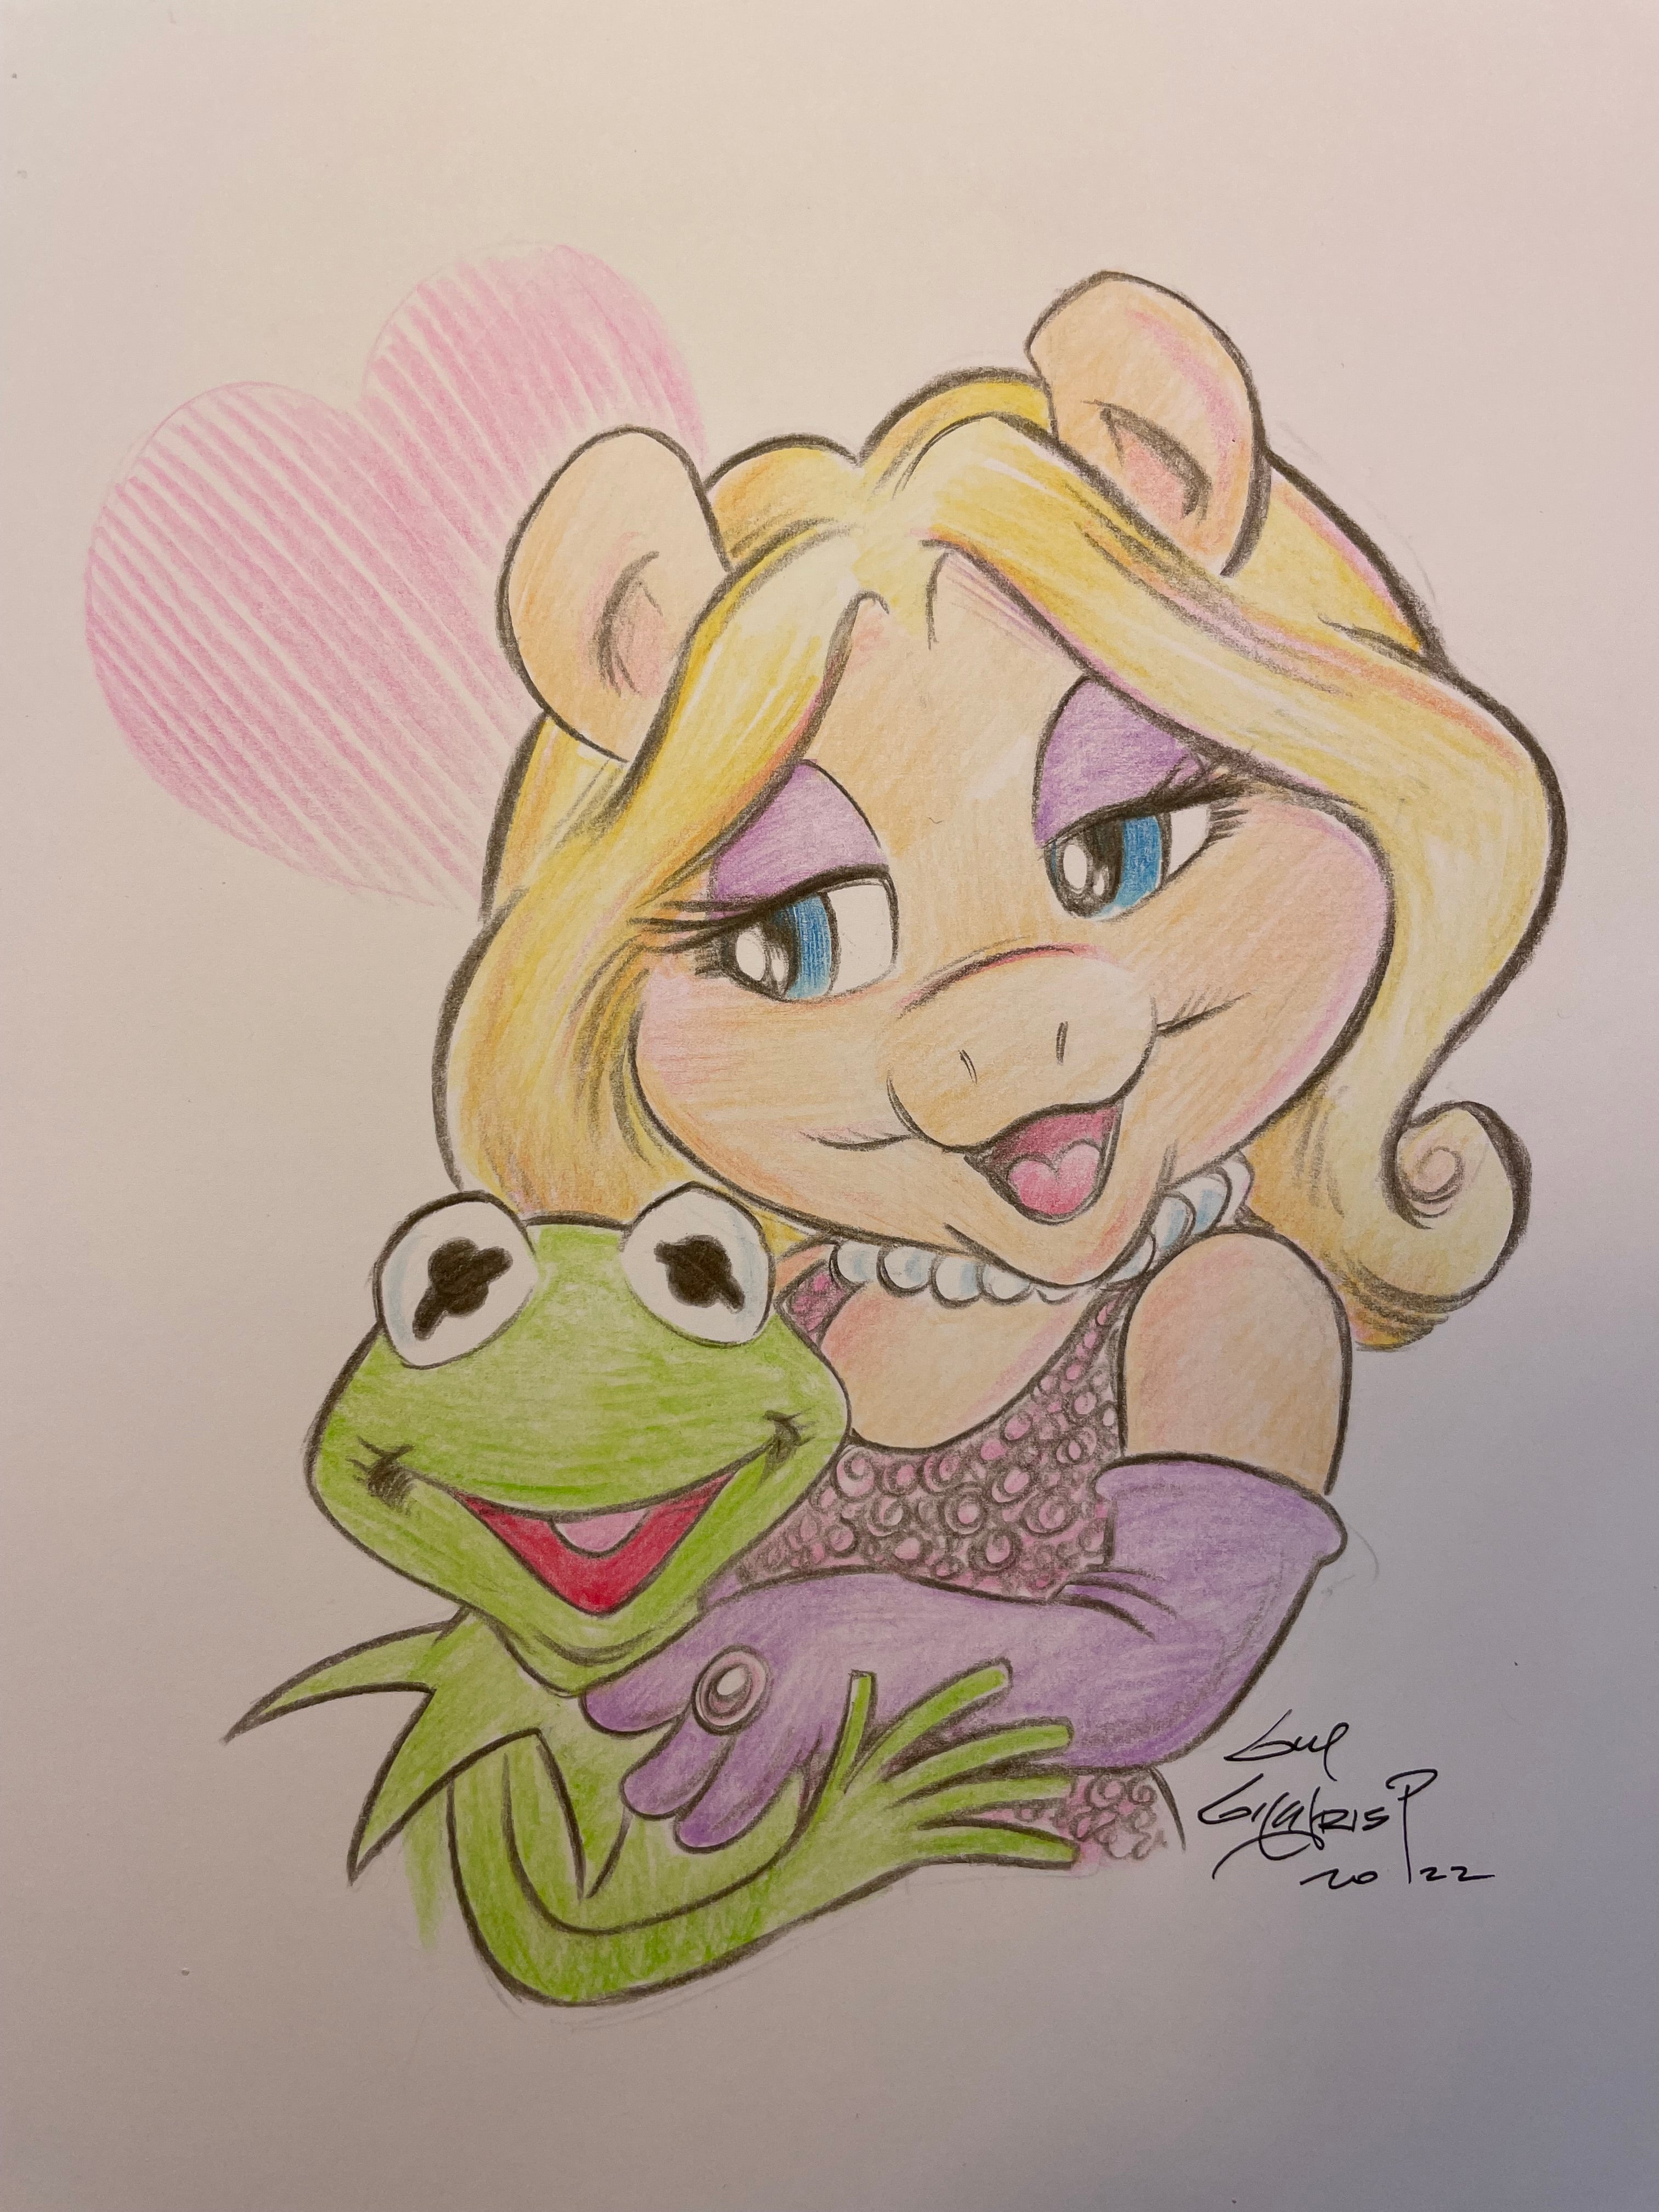 Kermit and Miss Piggy on the Kiss from FROM HERE TO ETERNITY 